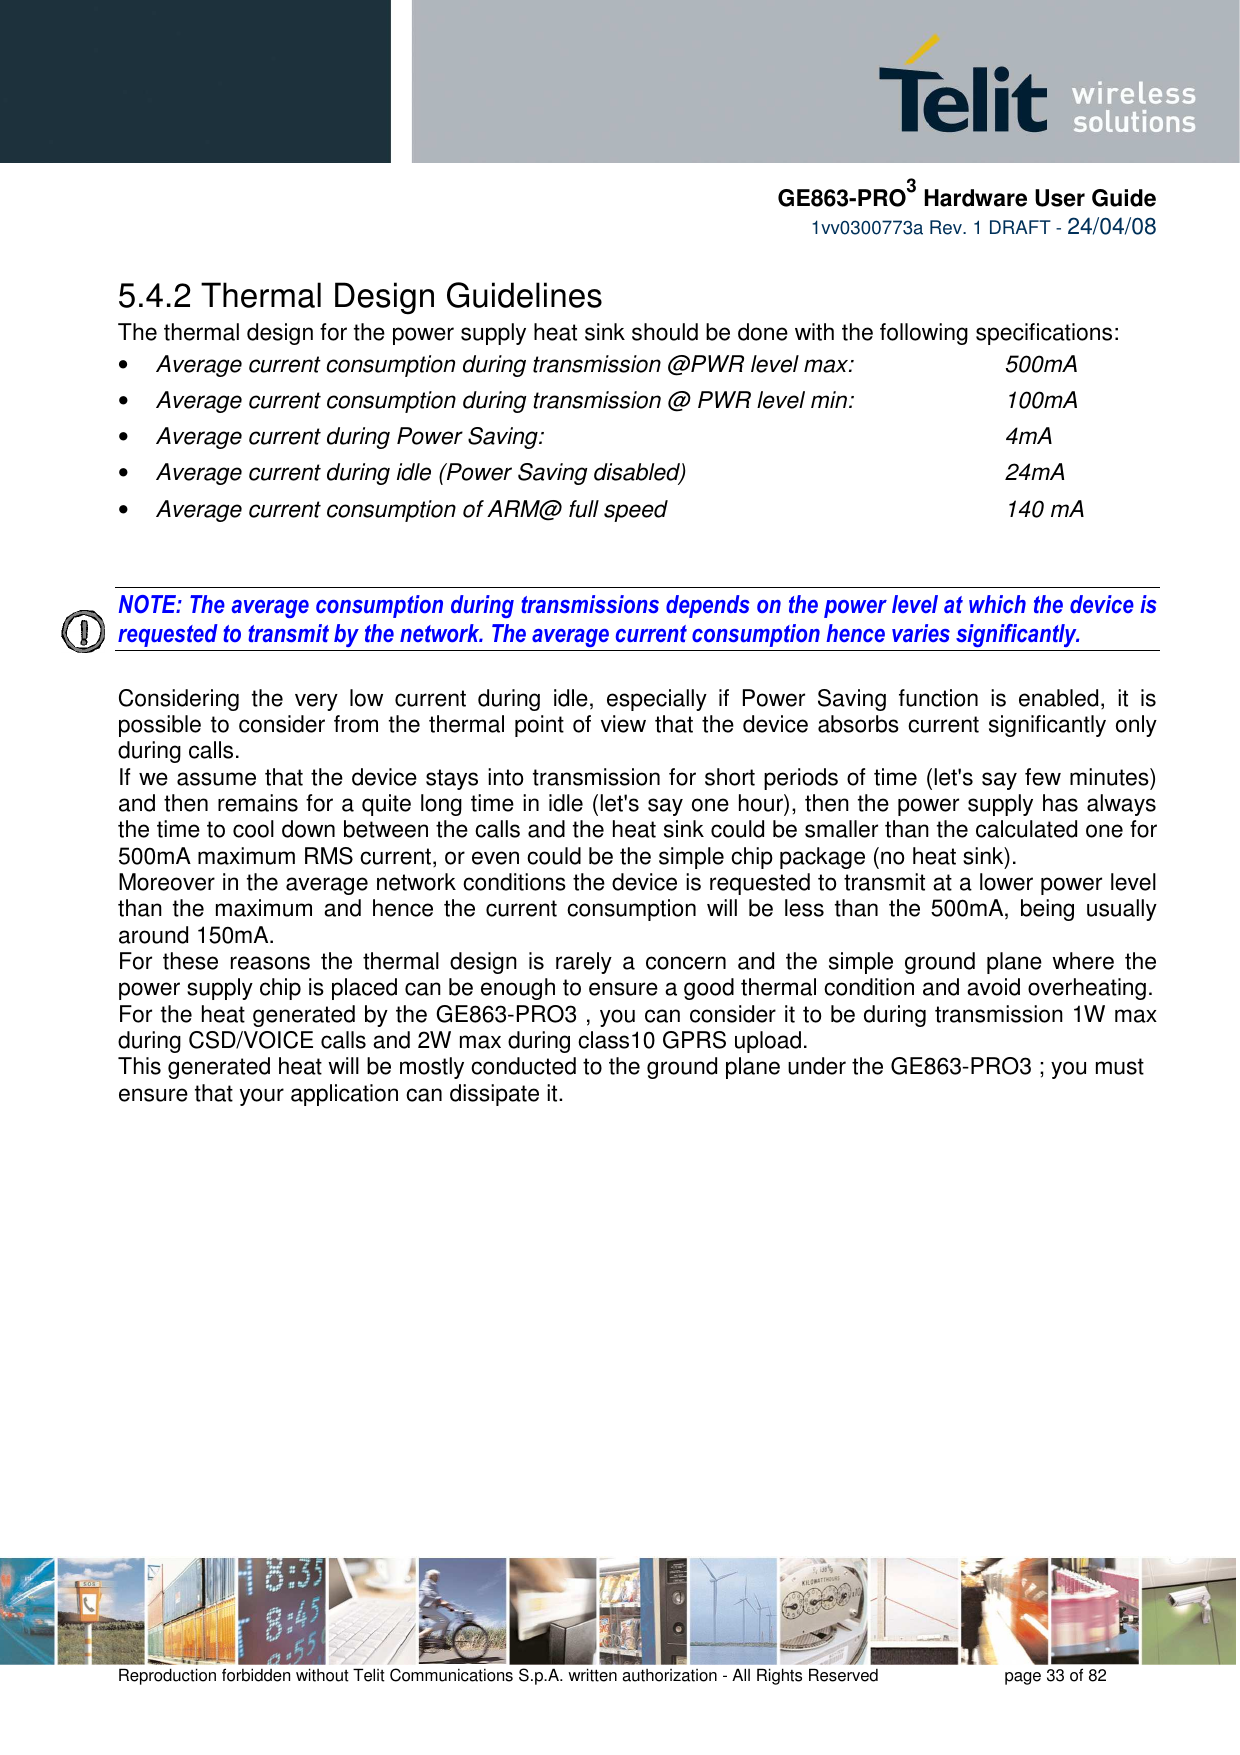     GE863-PRO3 Hardware User Guide  1vv0300773a Rev. 1 DRAFT - 24/04/08    Reproduction forbidden without Telit Communications S.p.A. written authorization - All Rights Reserved    page 33 of 82  5.4.2 Thermal Design Guidelines The thermal design for the power supply heat sink should be done with the following specifications: • Average current consumption during transmission @PWR level max:    500mA • Average current consumption during transmission @ PWR level min:    100mA  • Average current during Power Saving:             4mA • Average current during idle (Power Saving disabled)        24mA • Average current consumption of ARM@ full speed        140 mA   NOTE: The average consumption during transmissions depends on the power level at which the device is requested to transmit by the network. The average current consumption hence varies significantly.  Considering  the  very  low  current  during  idle,  especially  if  Power  Saving  function  is  enabled,  it  is possible to consider from the thermal point of view that the device absorbs current significantly only during calls.  If we assume that the device stays into transmission for short periods of time (let&apos;s say few minutes) and then remains for a quite long time in idle (let&apos;s say one hour), then the power supply has always the time to cool down between the calls and the heat sink could be smaller than the calculated one for 500mA maximum RMS current, or even could be the simple chip package (no heat sink). Moreover in the average network conditions the device is requested to transmit at a lower power level than the  maximum and hence  the current consumption will be  less than the  500mA, being  usually around 150mA. For  these  reasons  the  thermal  design  is  rarely  a  concern  and  the  simple ground  plane  where  the power supply chip is placed can be enough to ensure a good thermal condition and avoid overheating.  For the heat generated by the GE863-PRO3 , you can consider it to be during transmission 1W max during CSD/VOICE calls and 2W max during class10 GPRS upload.  This generated heat will be mostly conducted to the ground plane under the GE863-PRO3 ; you must ensure that your application can dissipate it.    